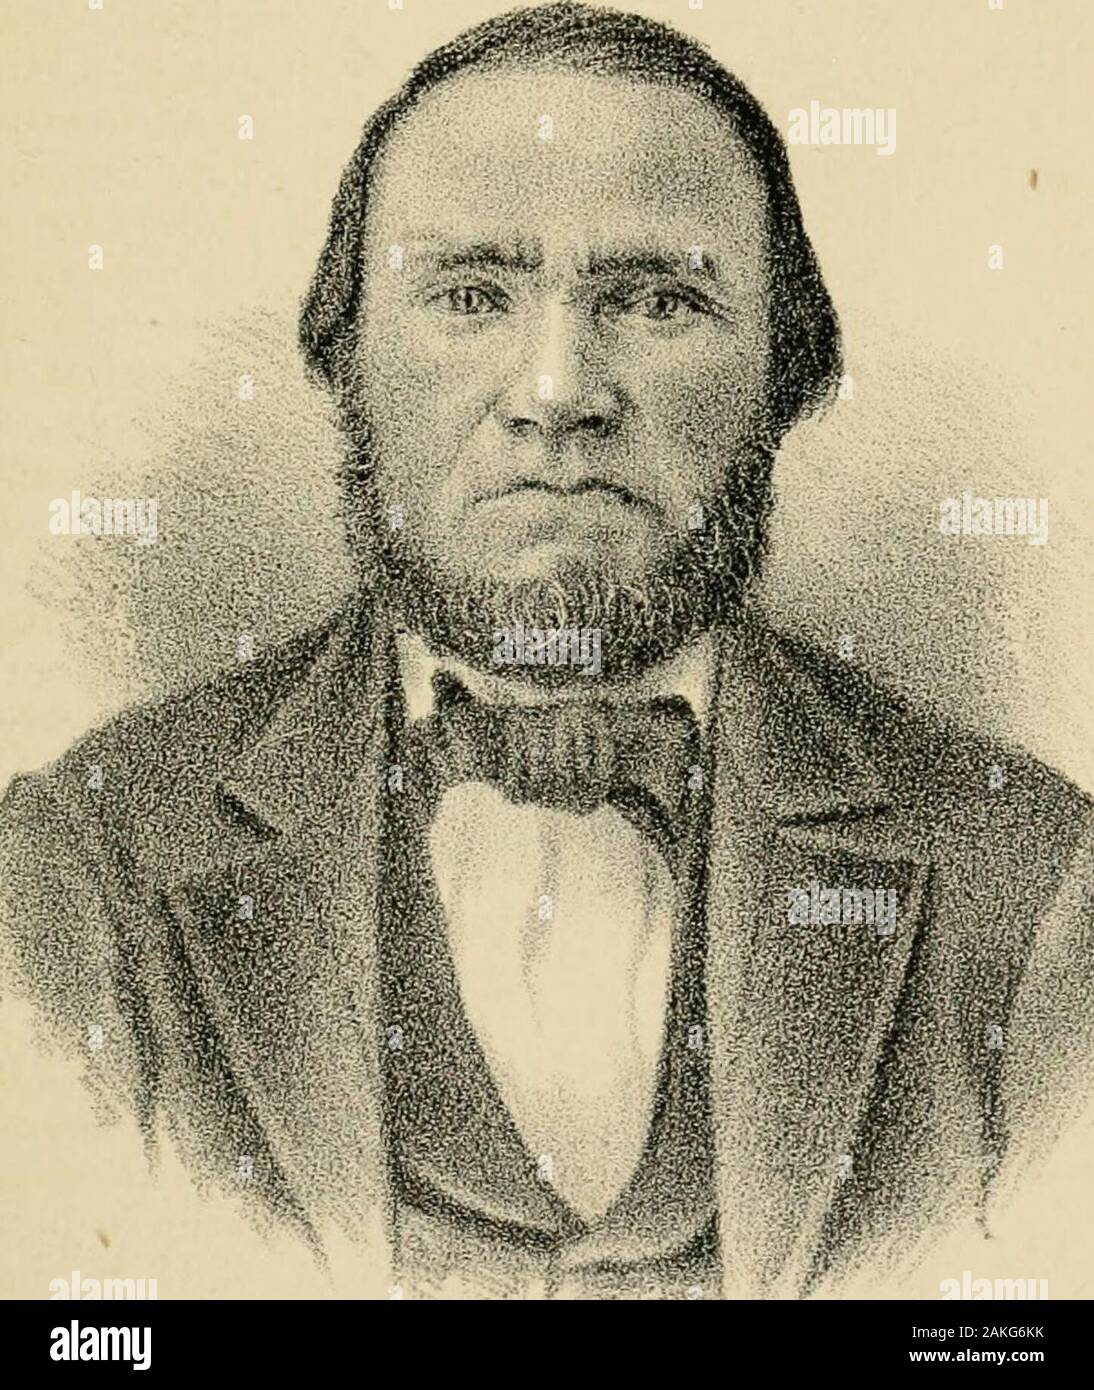 History of Winneshiek and Allamakee counties, Iowa . mpson was arrested at Calmar inWinneshiek County. In June following he was convicted of bur-glary and sentenced to one year at hard labor in the peniten-tiary. Dec. 21, 1876, Andway Torfin, who lived on the Iowa River inHanover township, while returning home from Decorah withothers, got into an altercation near Locust Lane with a party ofWinneshiek Norwegians, one of whom gave Torfin a blow uponthe head with a sled stake, from the effects of which he died threedays later. Three of the party were arrested, only one of whomwas held, Helge Nels Stock Photo